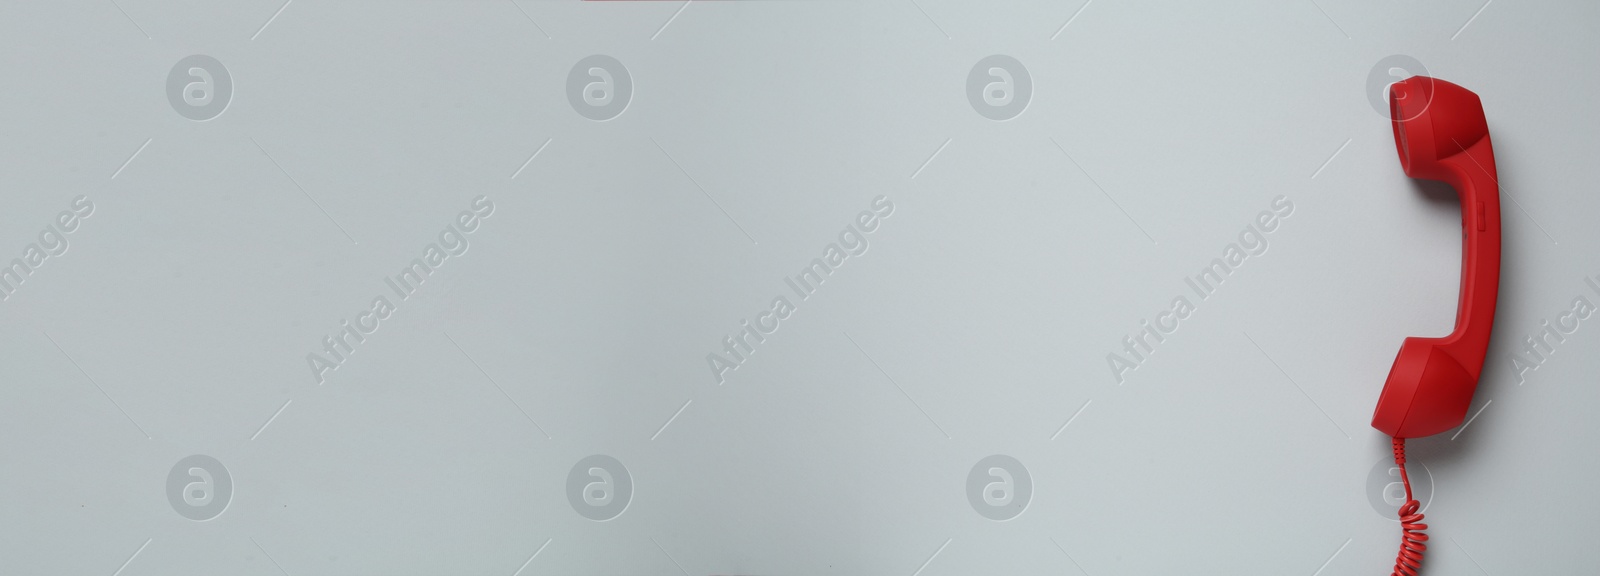 Image of Hotline service. Red telephone receiver and space for text on light grey background, top view